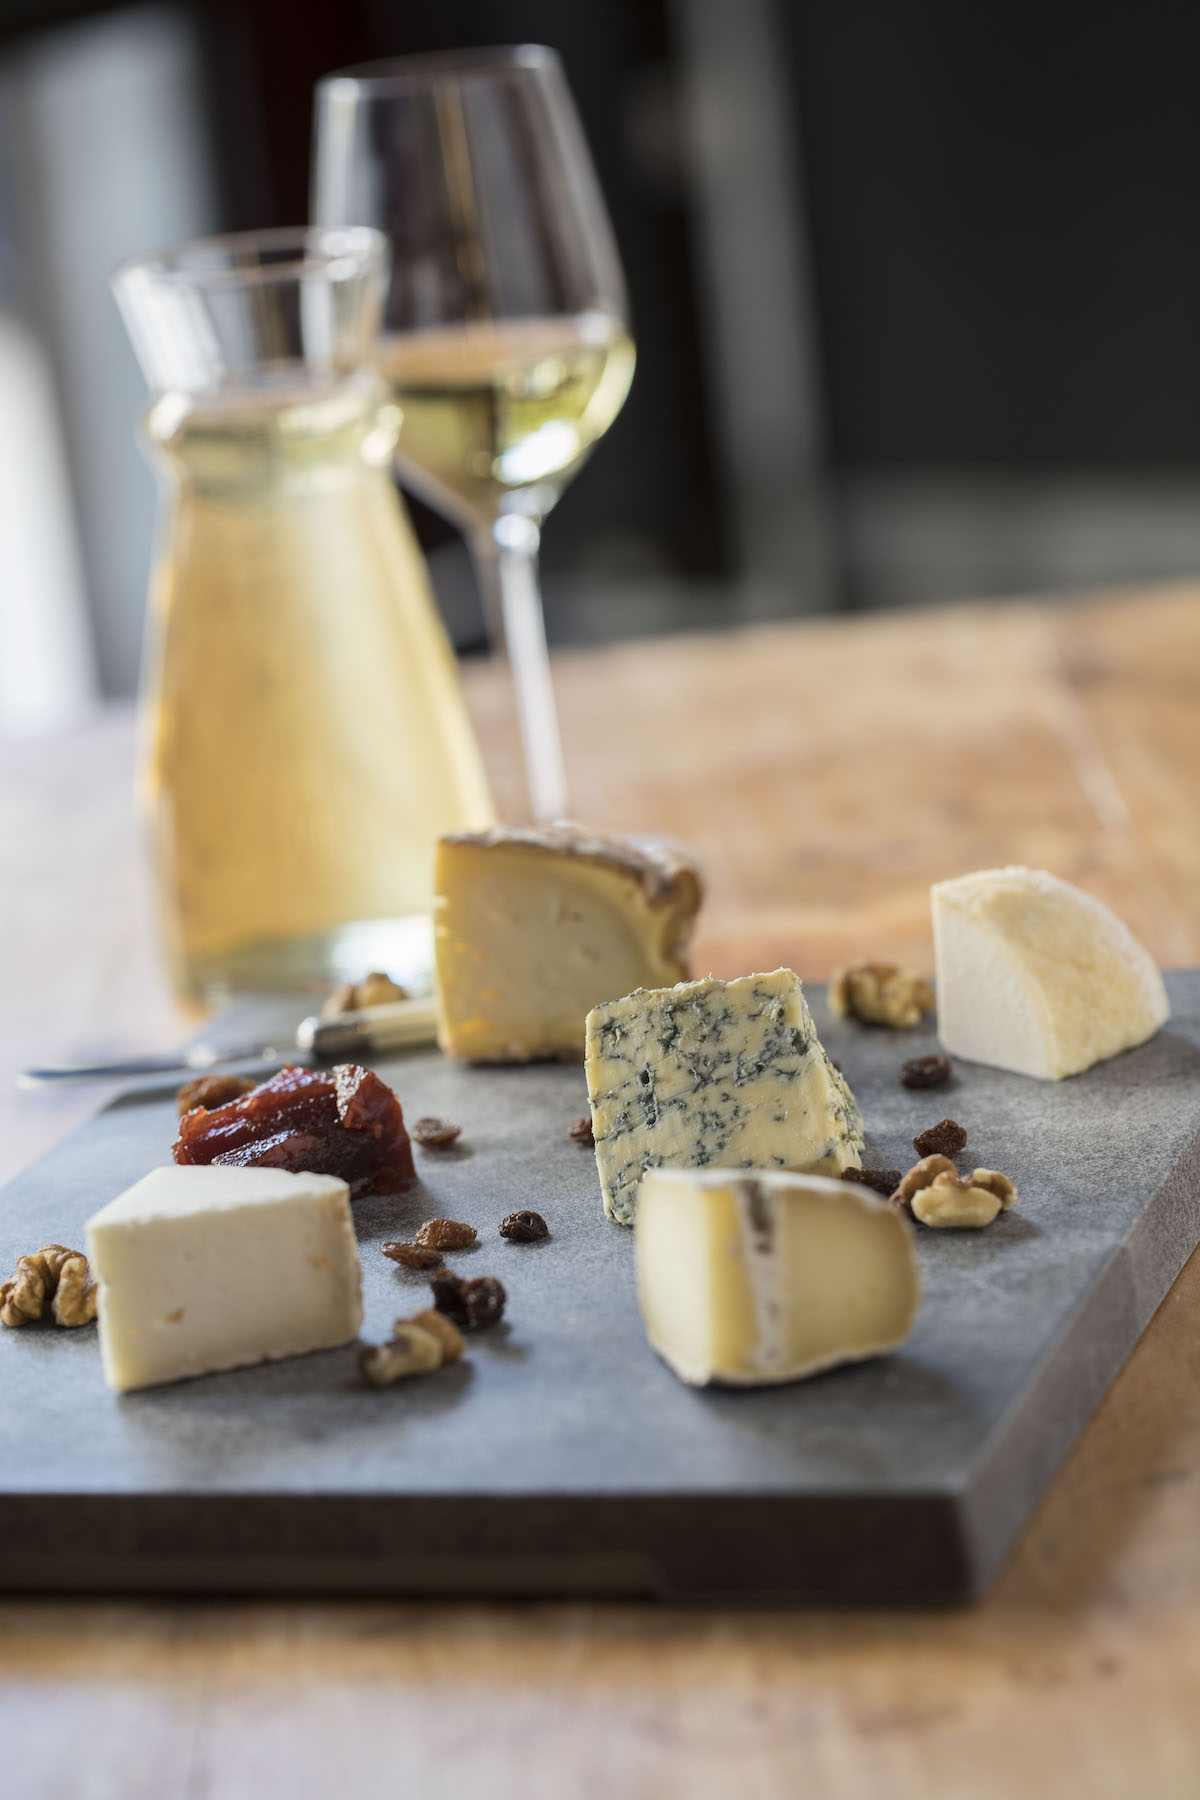 Small chunks of cheese arranged with nuts on a dark gray board, with a glass of white wine in the background.